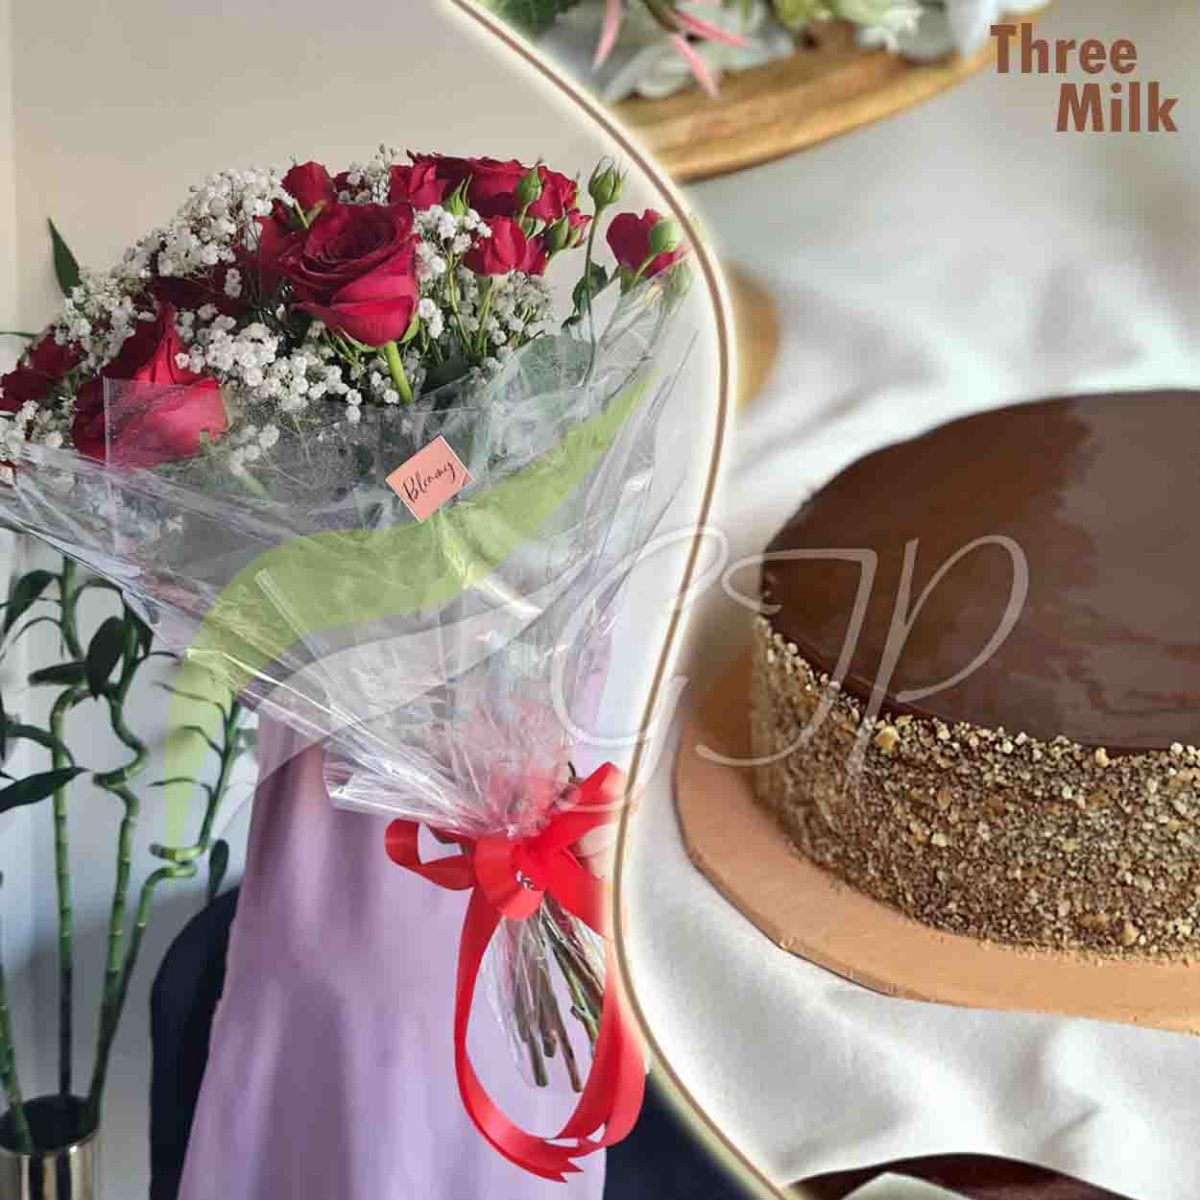 Sweet Surprise: A photo of a gift of roses and cake. The roses are red and wrapped in a transparent plastic with a red ribbon and a card. The cake is a round three milk cake